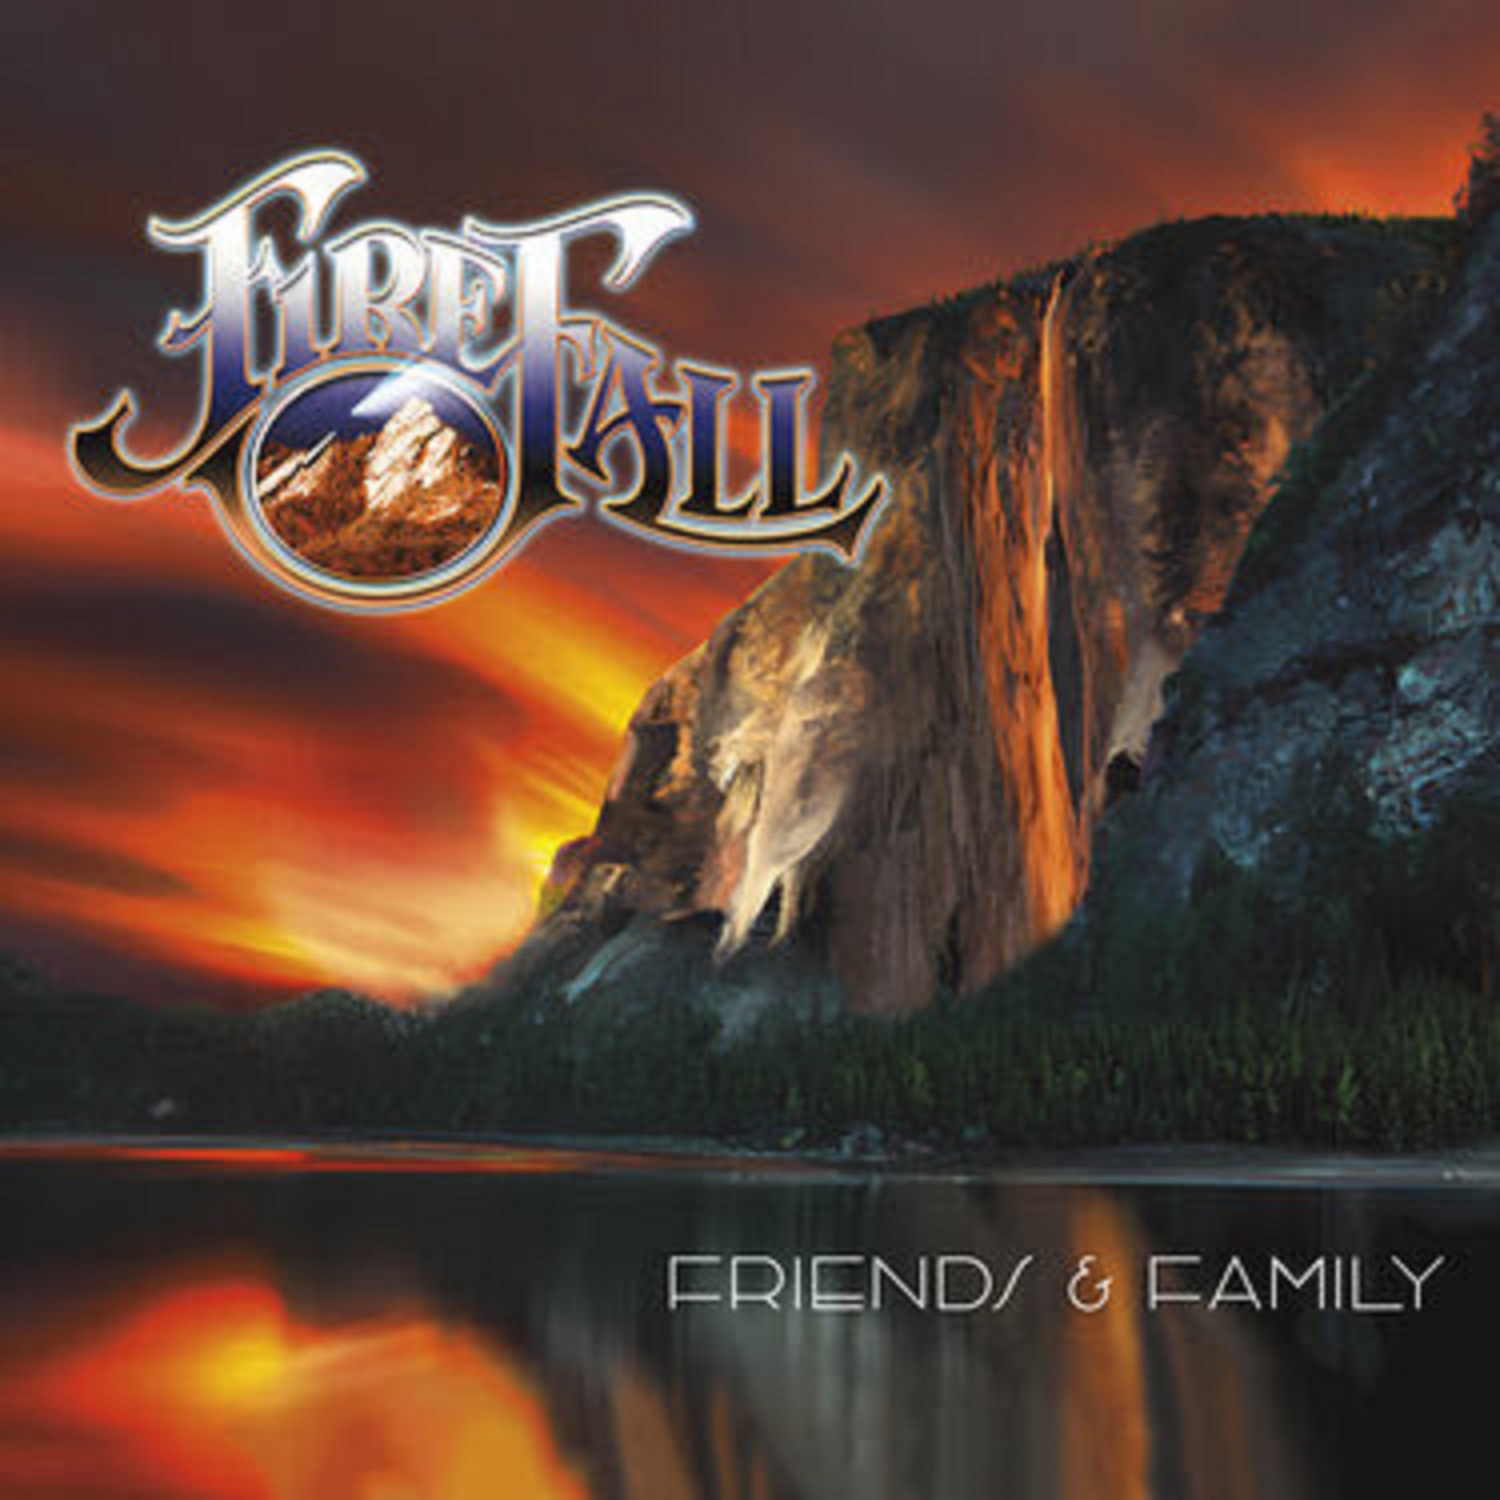 FIREFALL SALUTES FRIENDS & FAMILY ON THEIR UNIQUELY PERSONAL TRIBUTE ALBUM